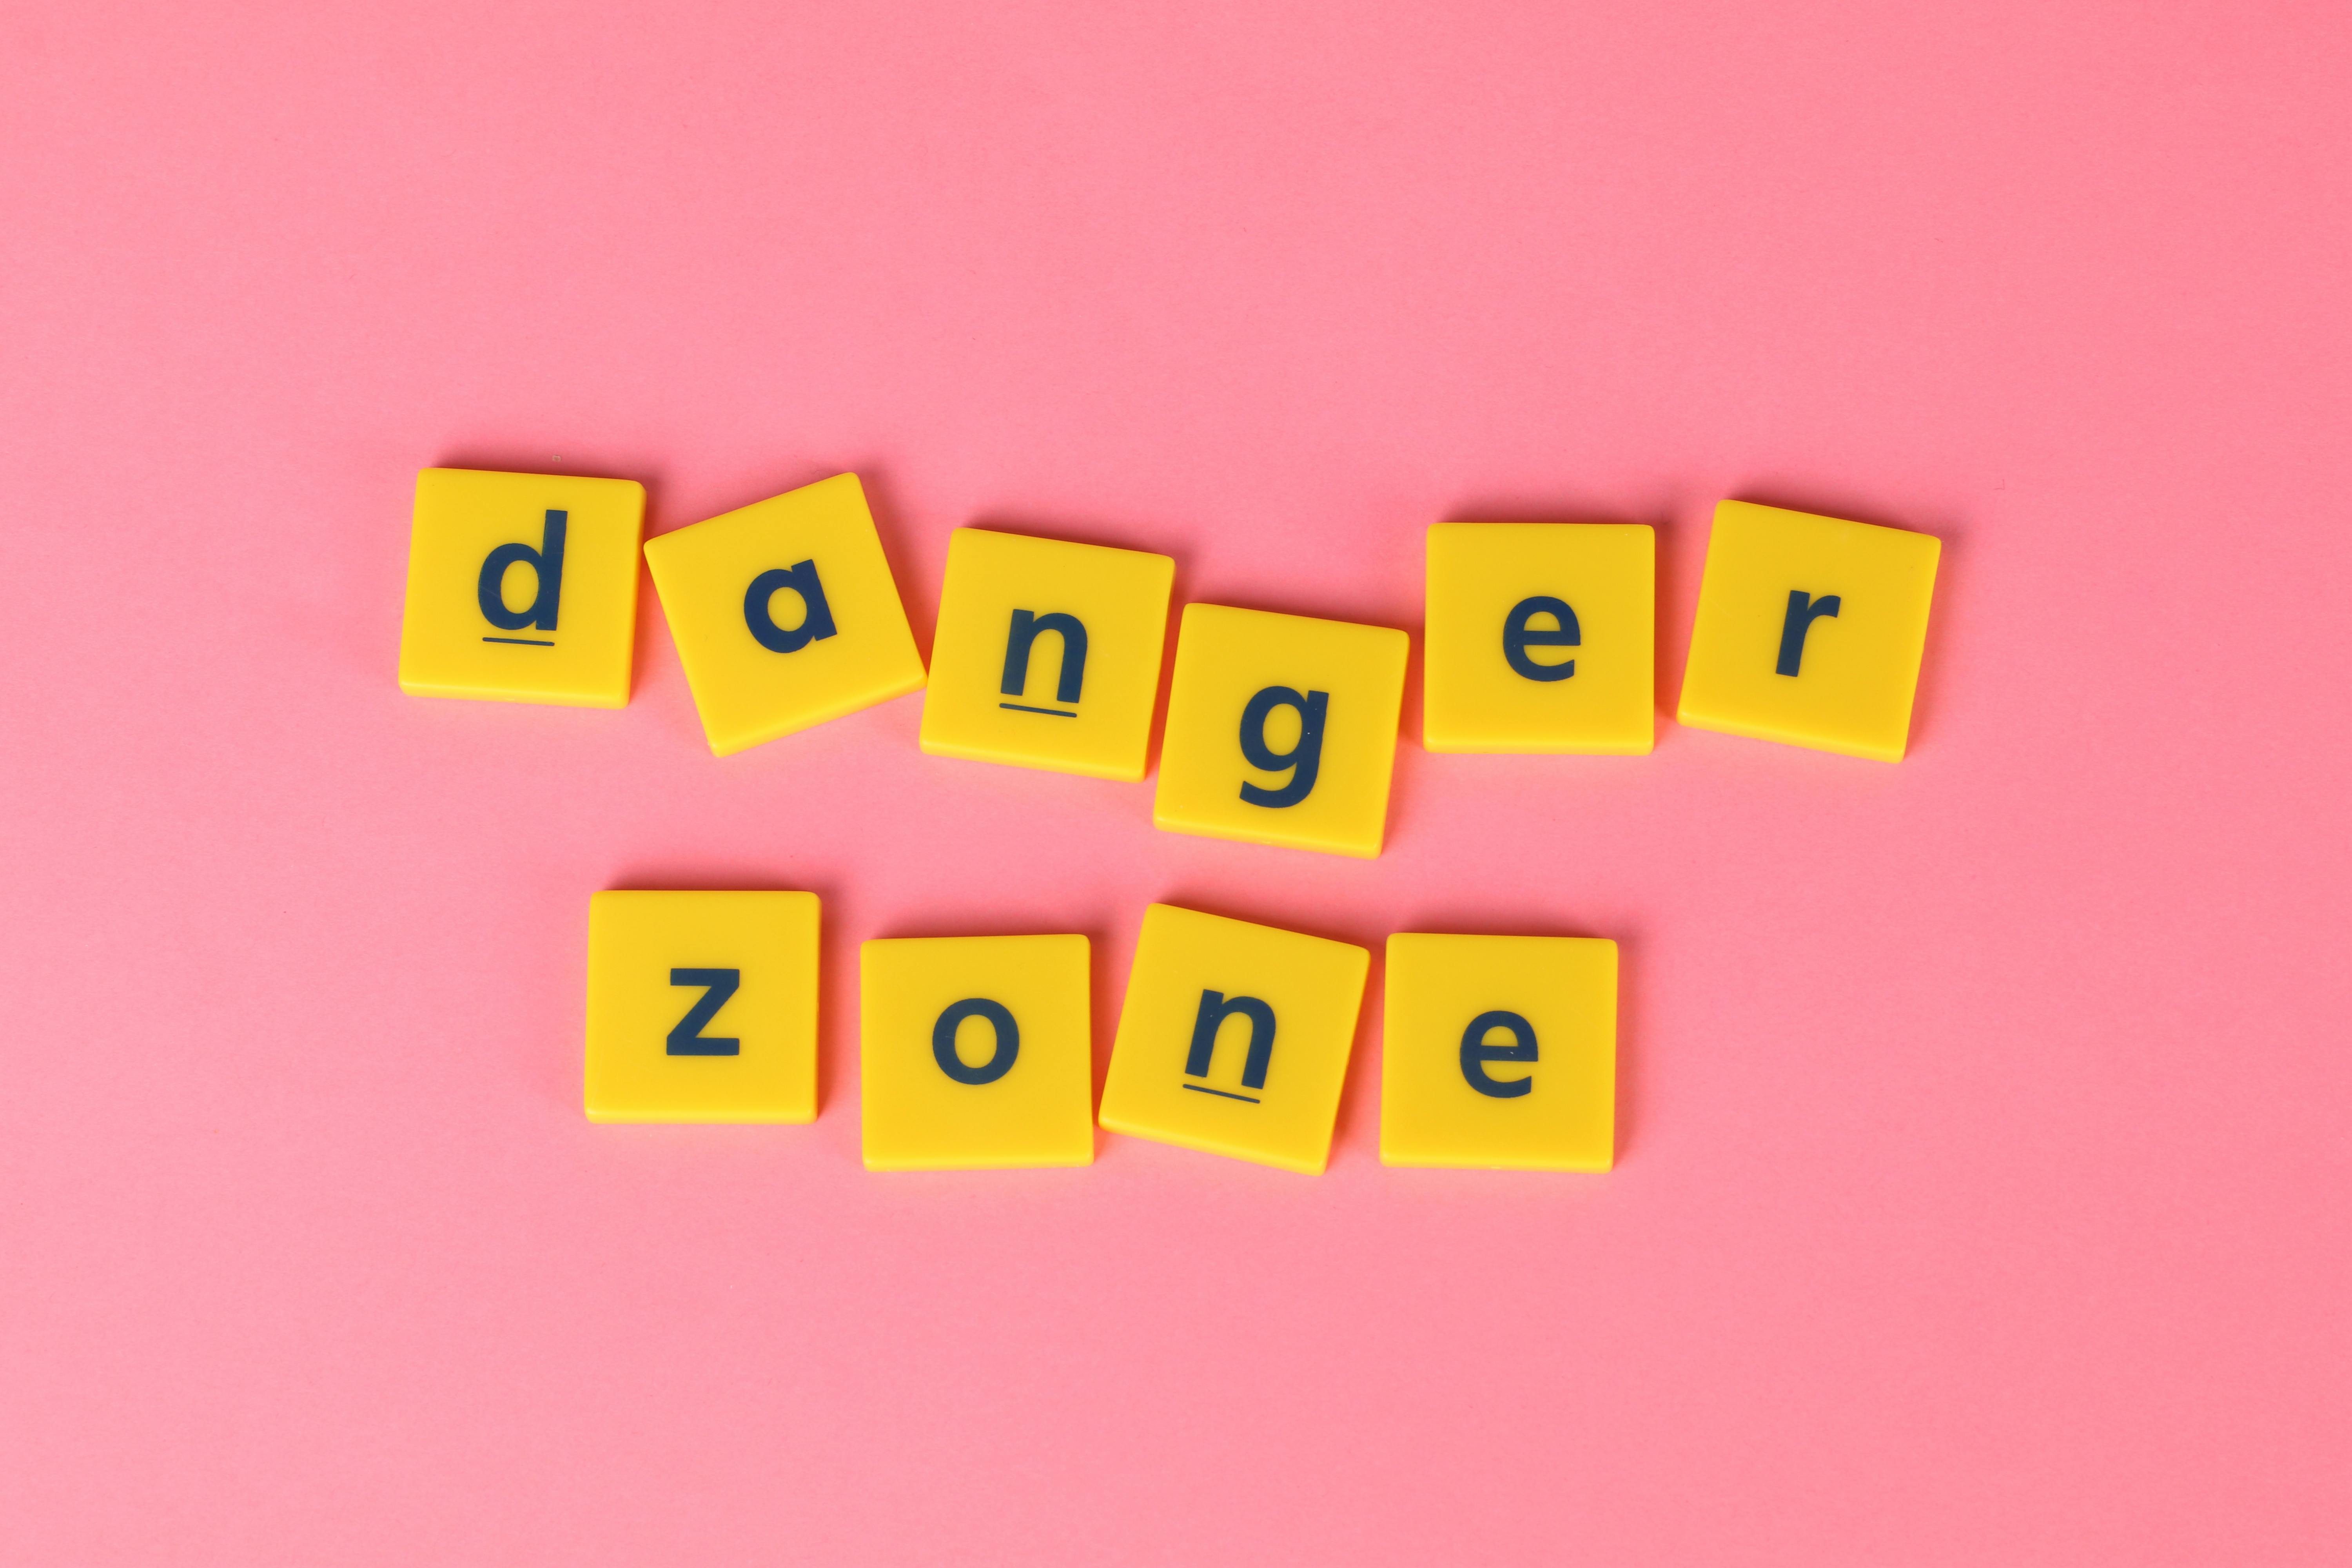 Free stock photo of danger zone, pink background